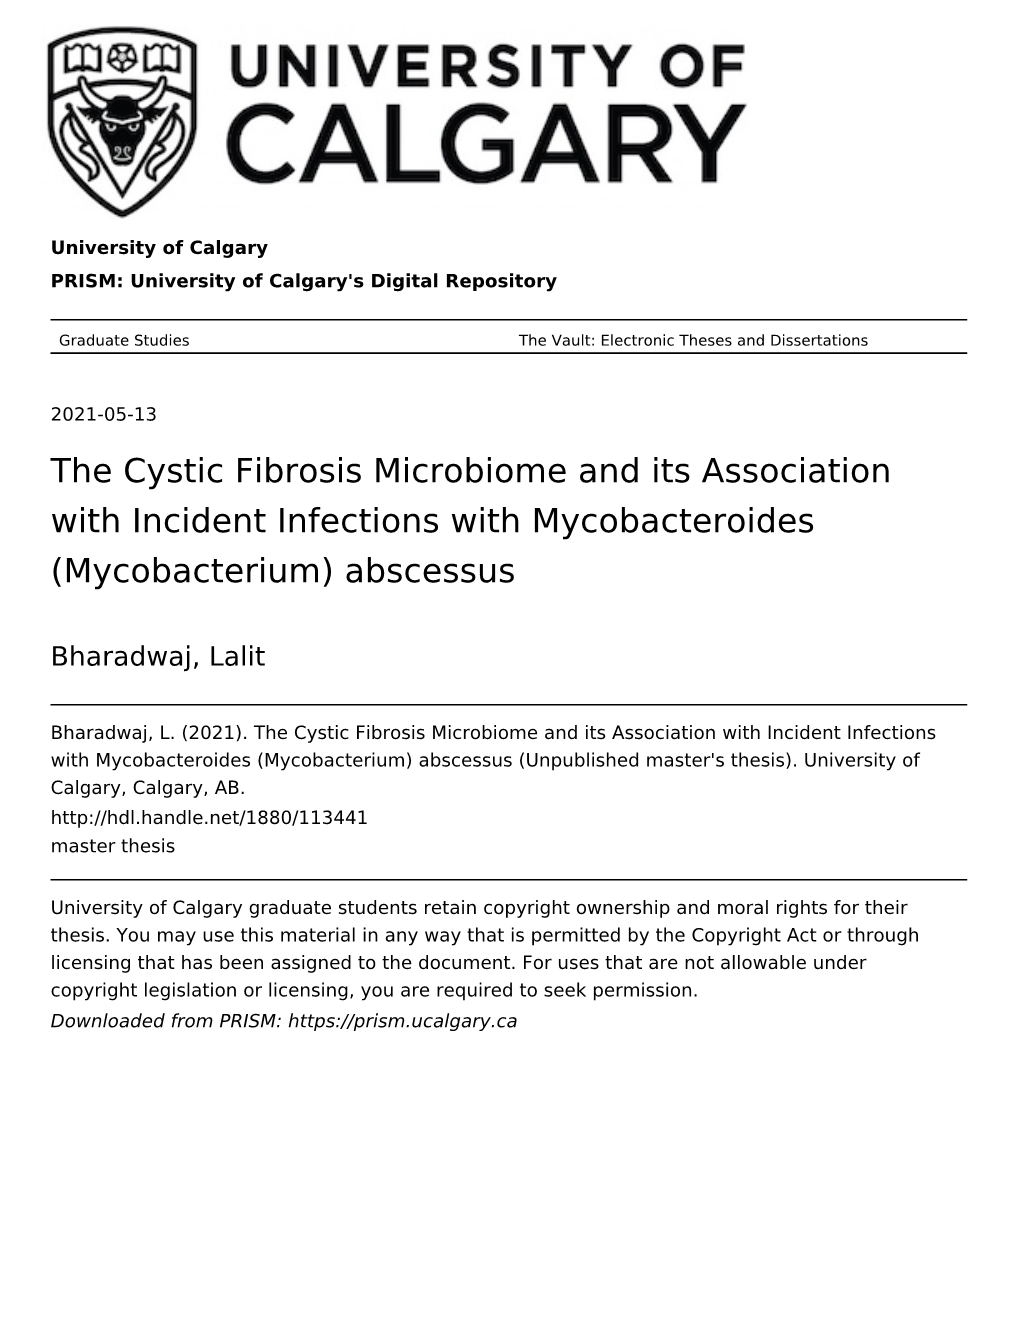 The Cystic Fibrosis Microbiome and Its Association with Incident Infections with Mycobacteroides (Mycobacterium) Abscessus